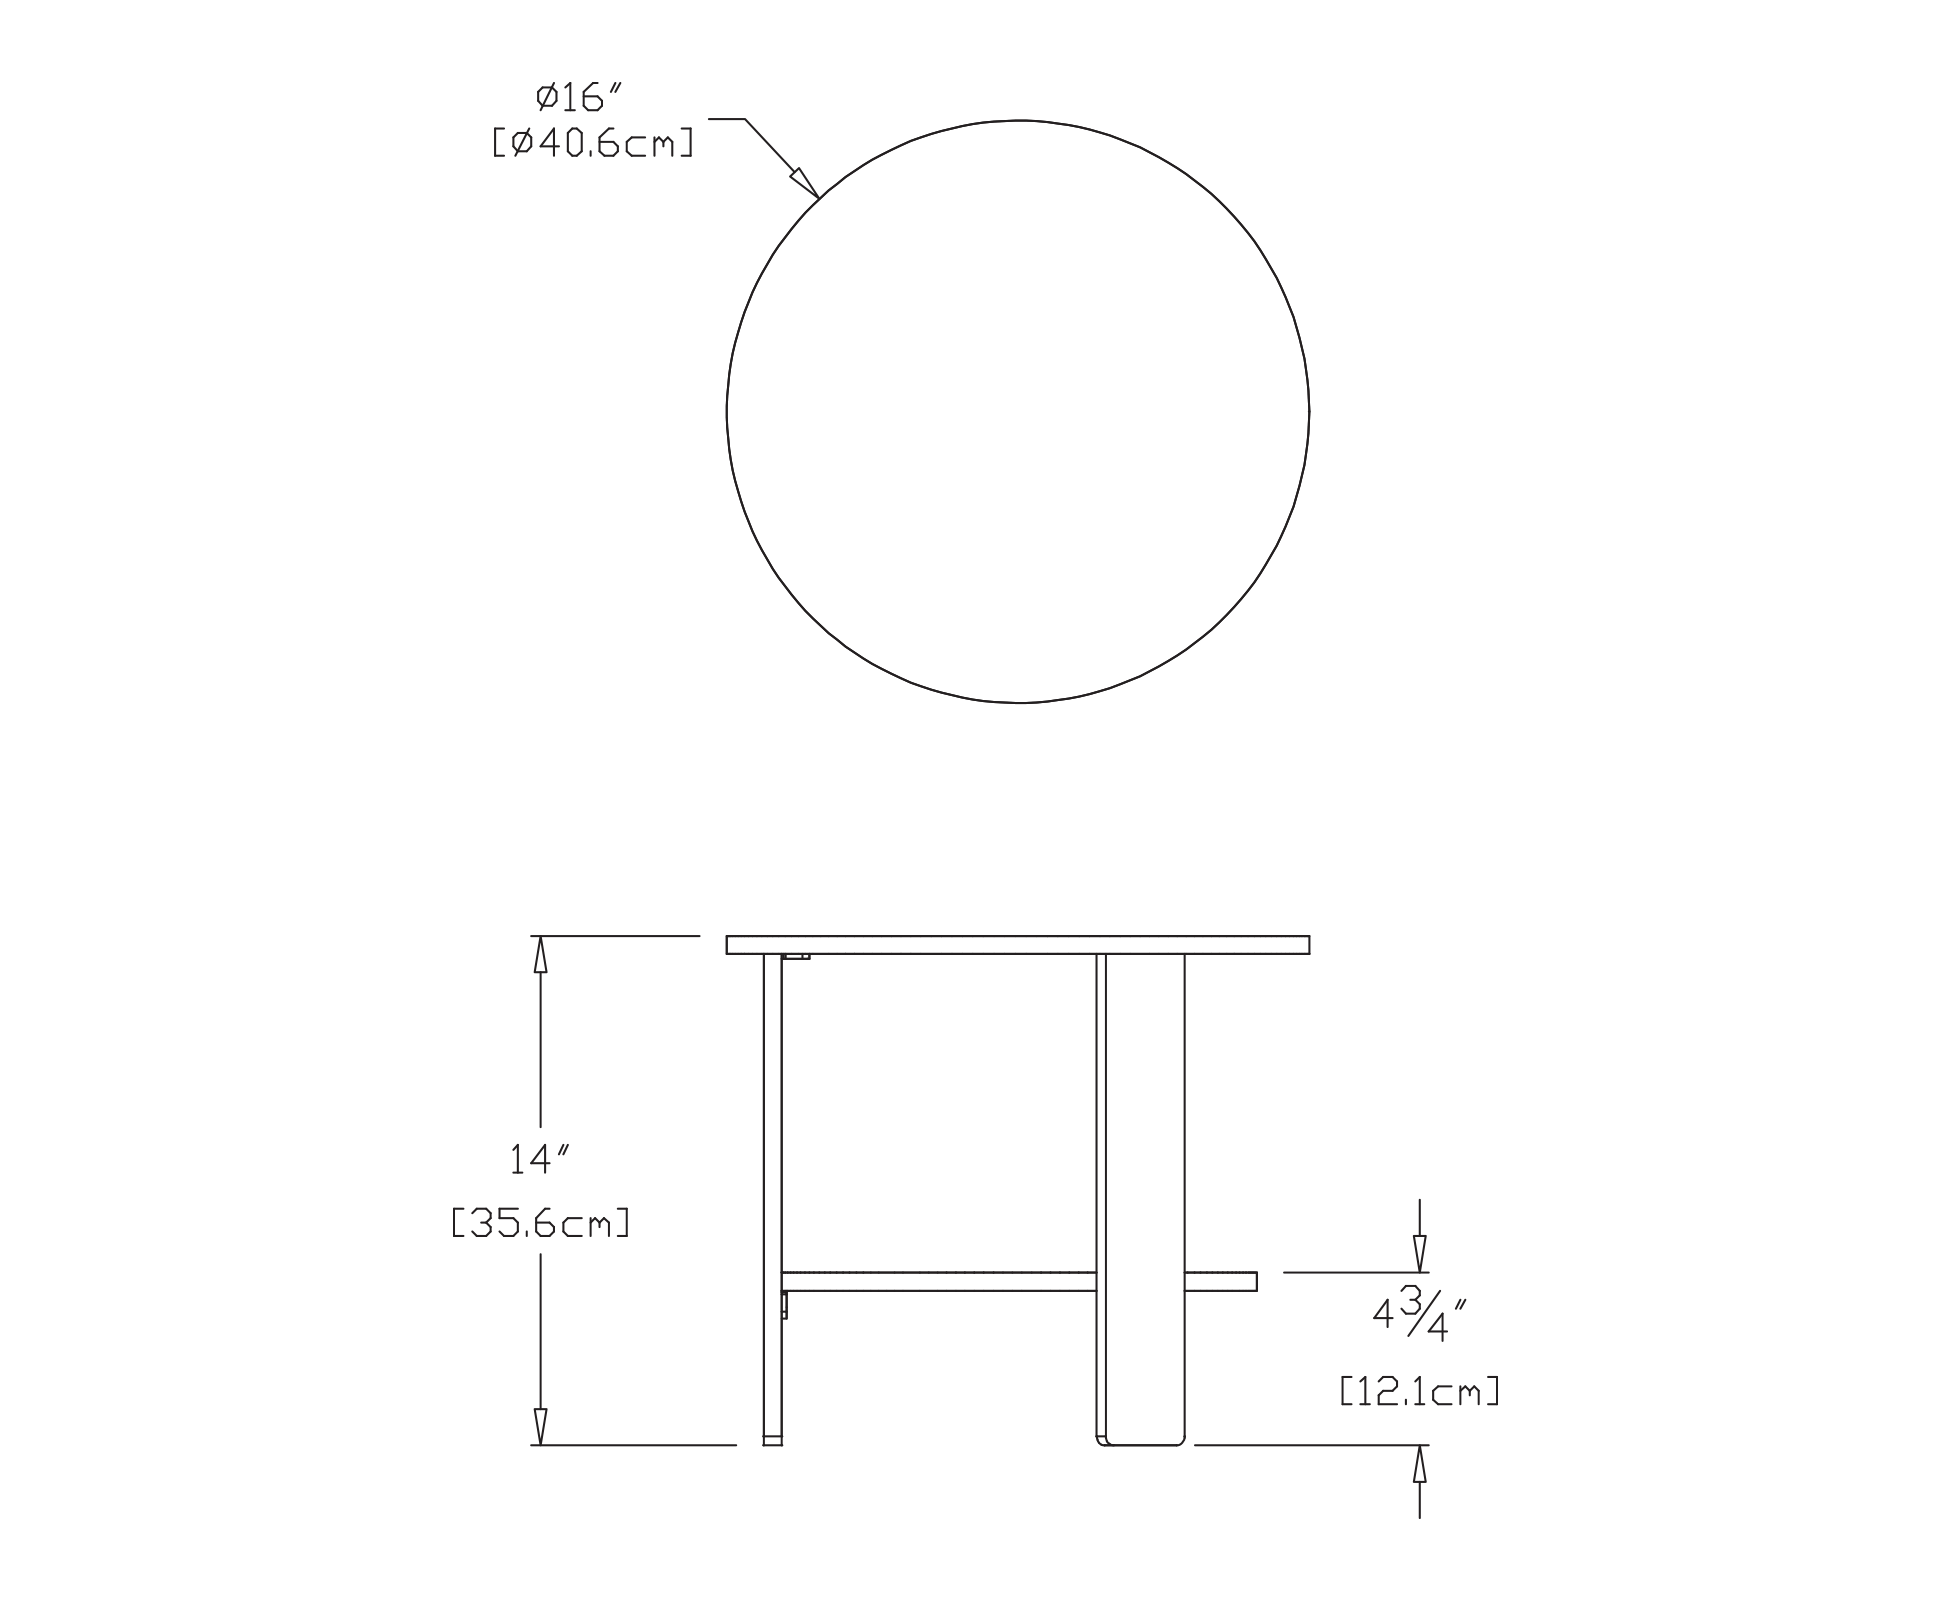 Lollygagger Side Table Dimensions